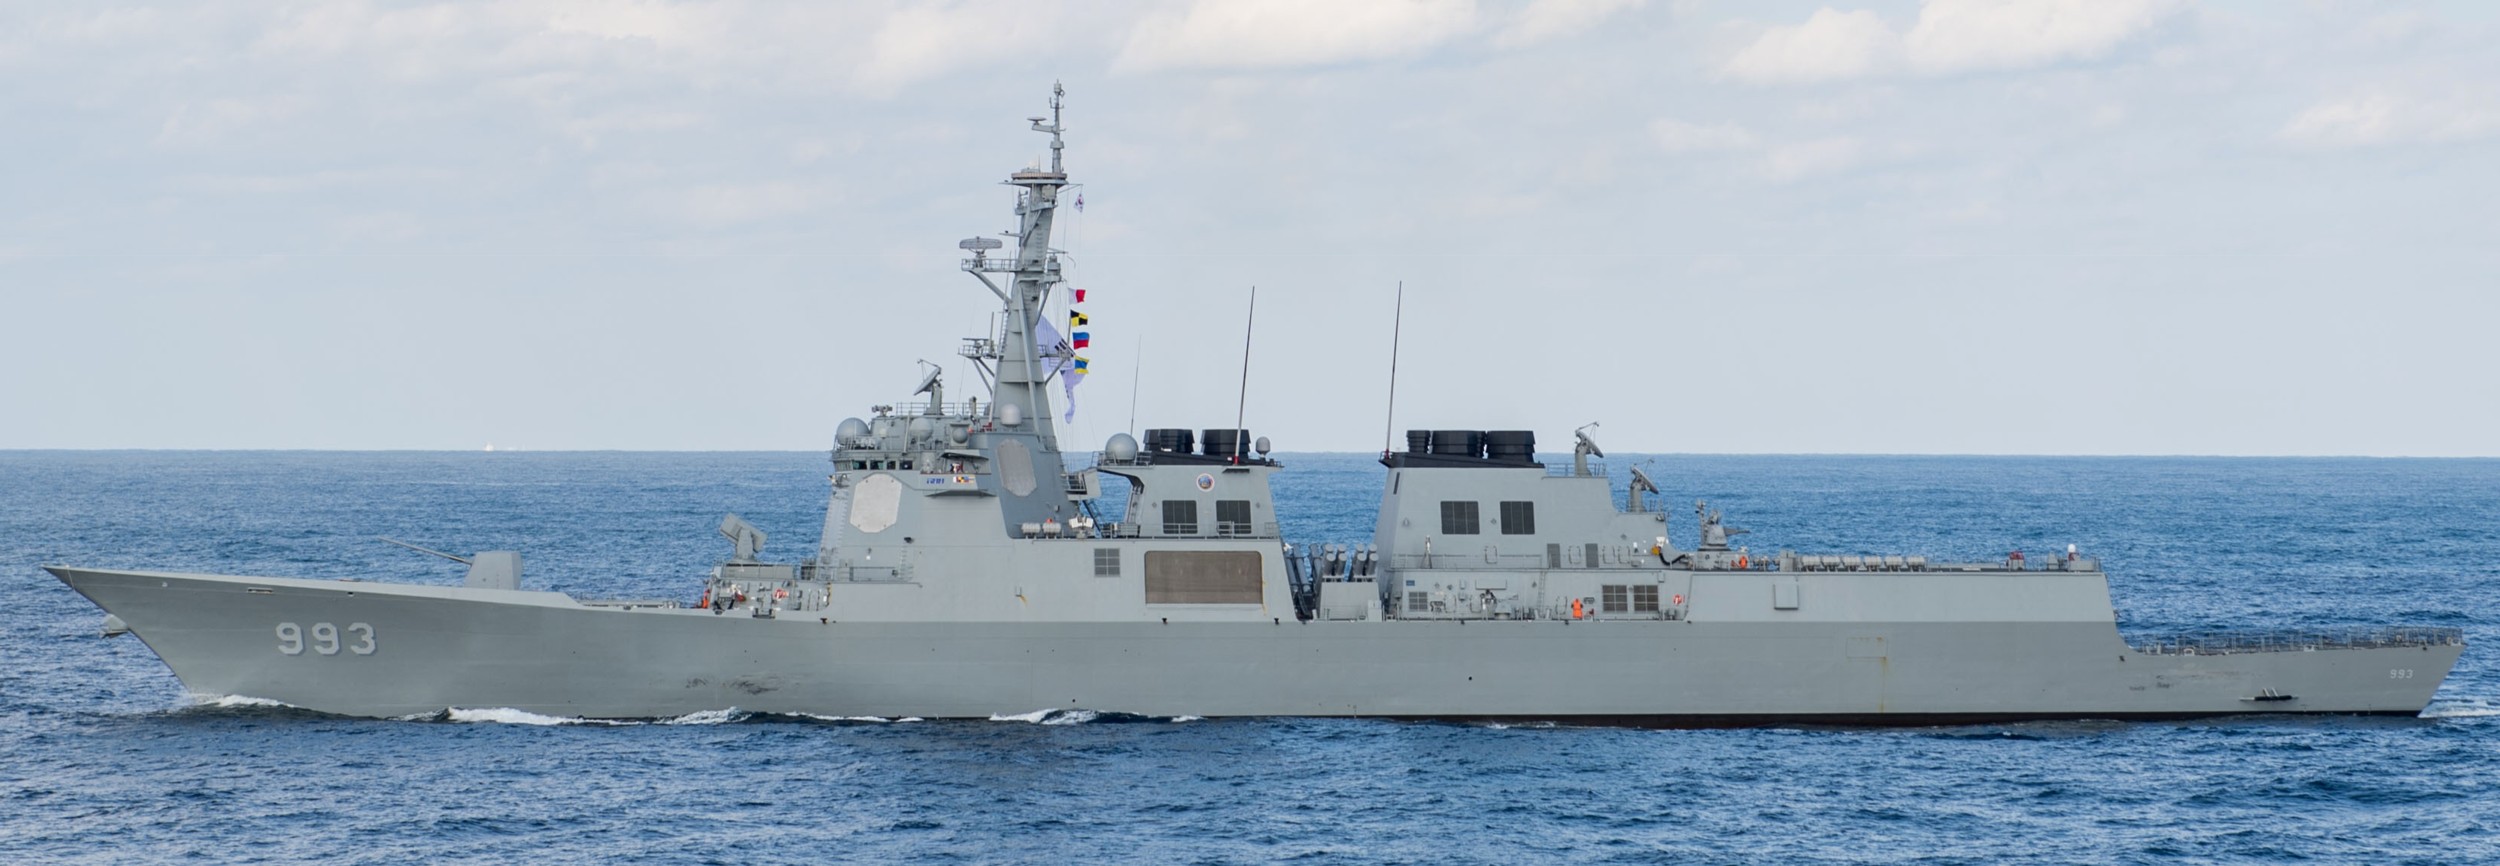 ddg-993 roks seoae ryu seong-ryong sejong the great class guided missile destroyer aegis republic of korea navy rokn 07